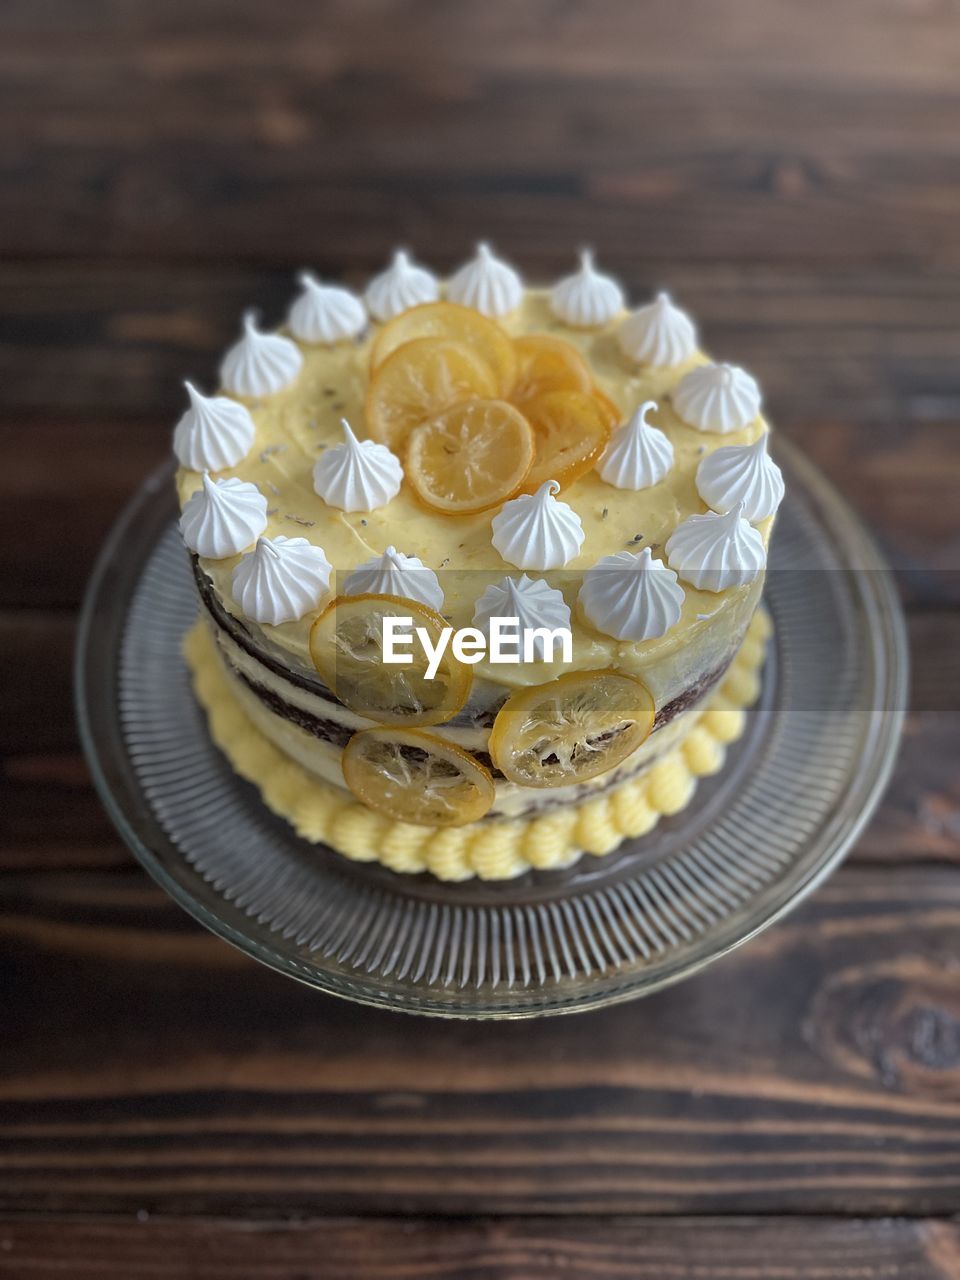 food and drink, food, cake, sweet food, icing, dessert, sweet, freshness, wood, baked, birthday cake, table, flower, yellow, indoors, plate, no people, temptation, fruit, cupcake, celebration, close-up, high angle view, still life, cake decorating, decoration, healthy eating, flowering plant